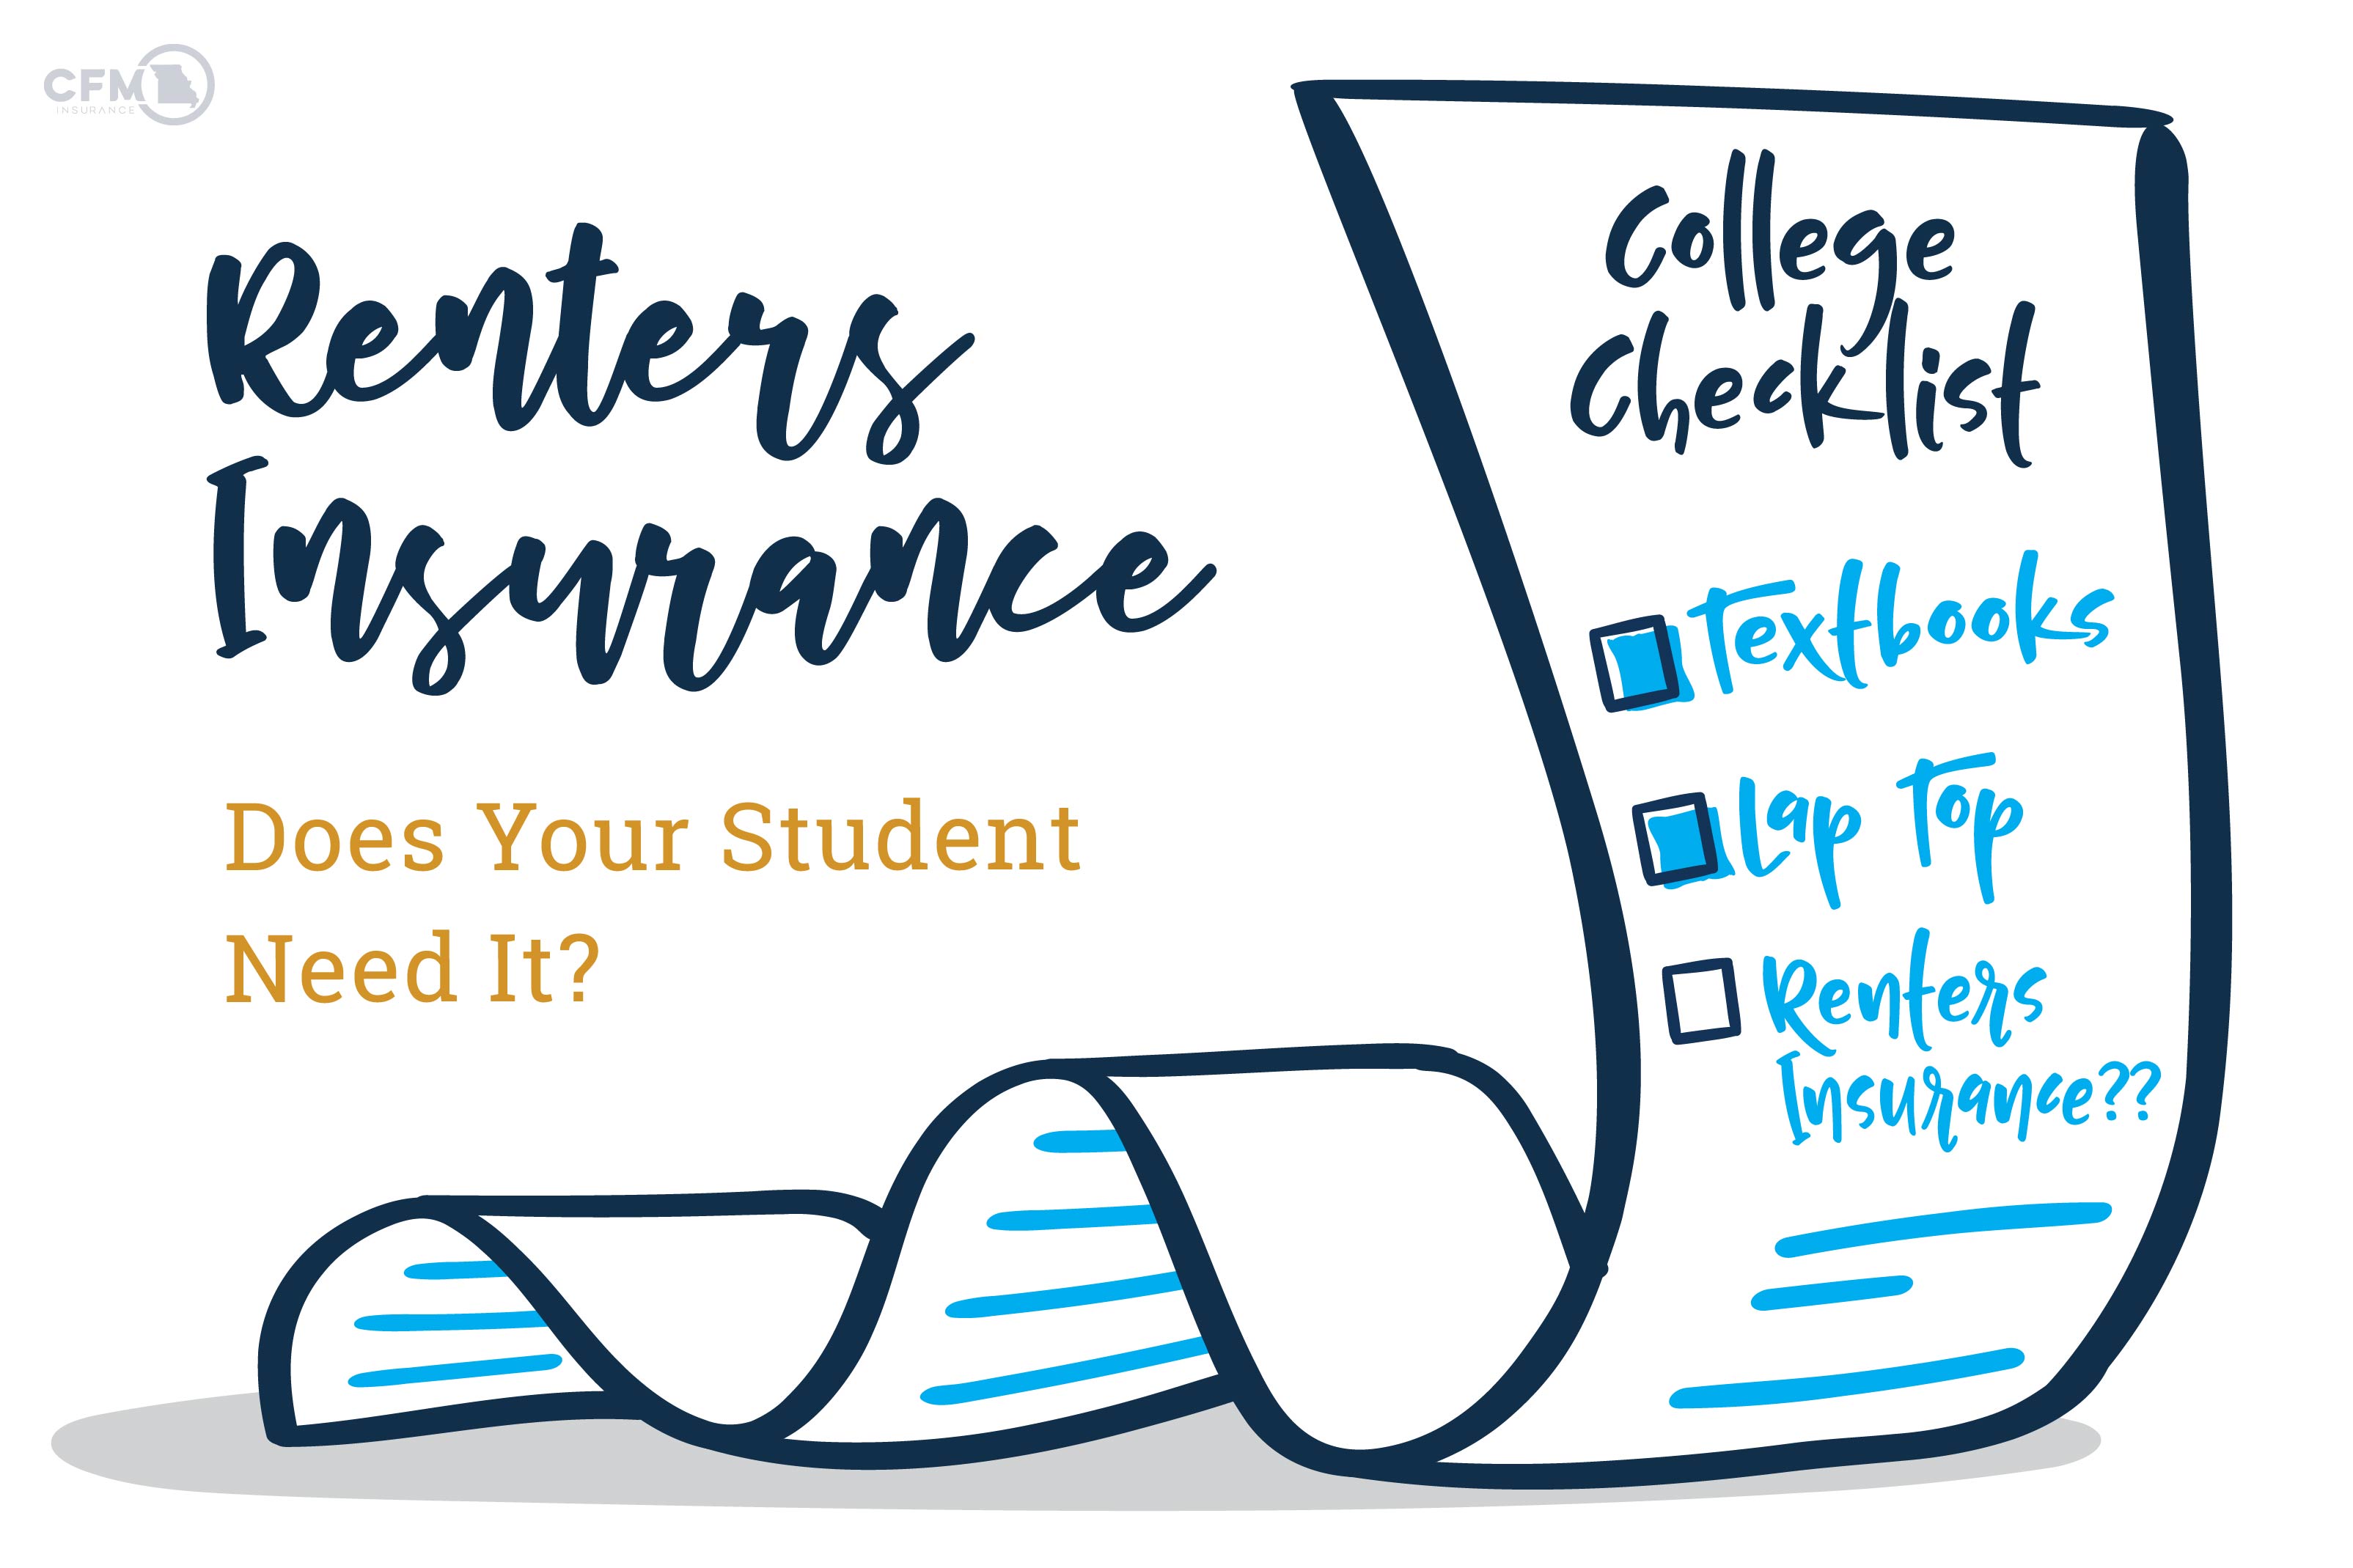 Do You Need Renters Insurance In College? Important Facts For Parents And Students To Consider